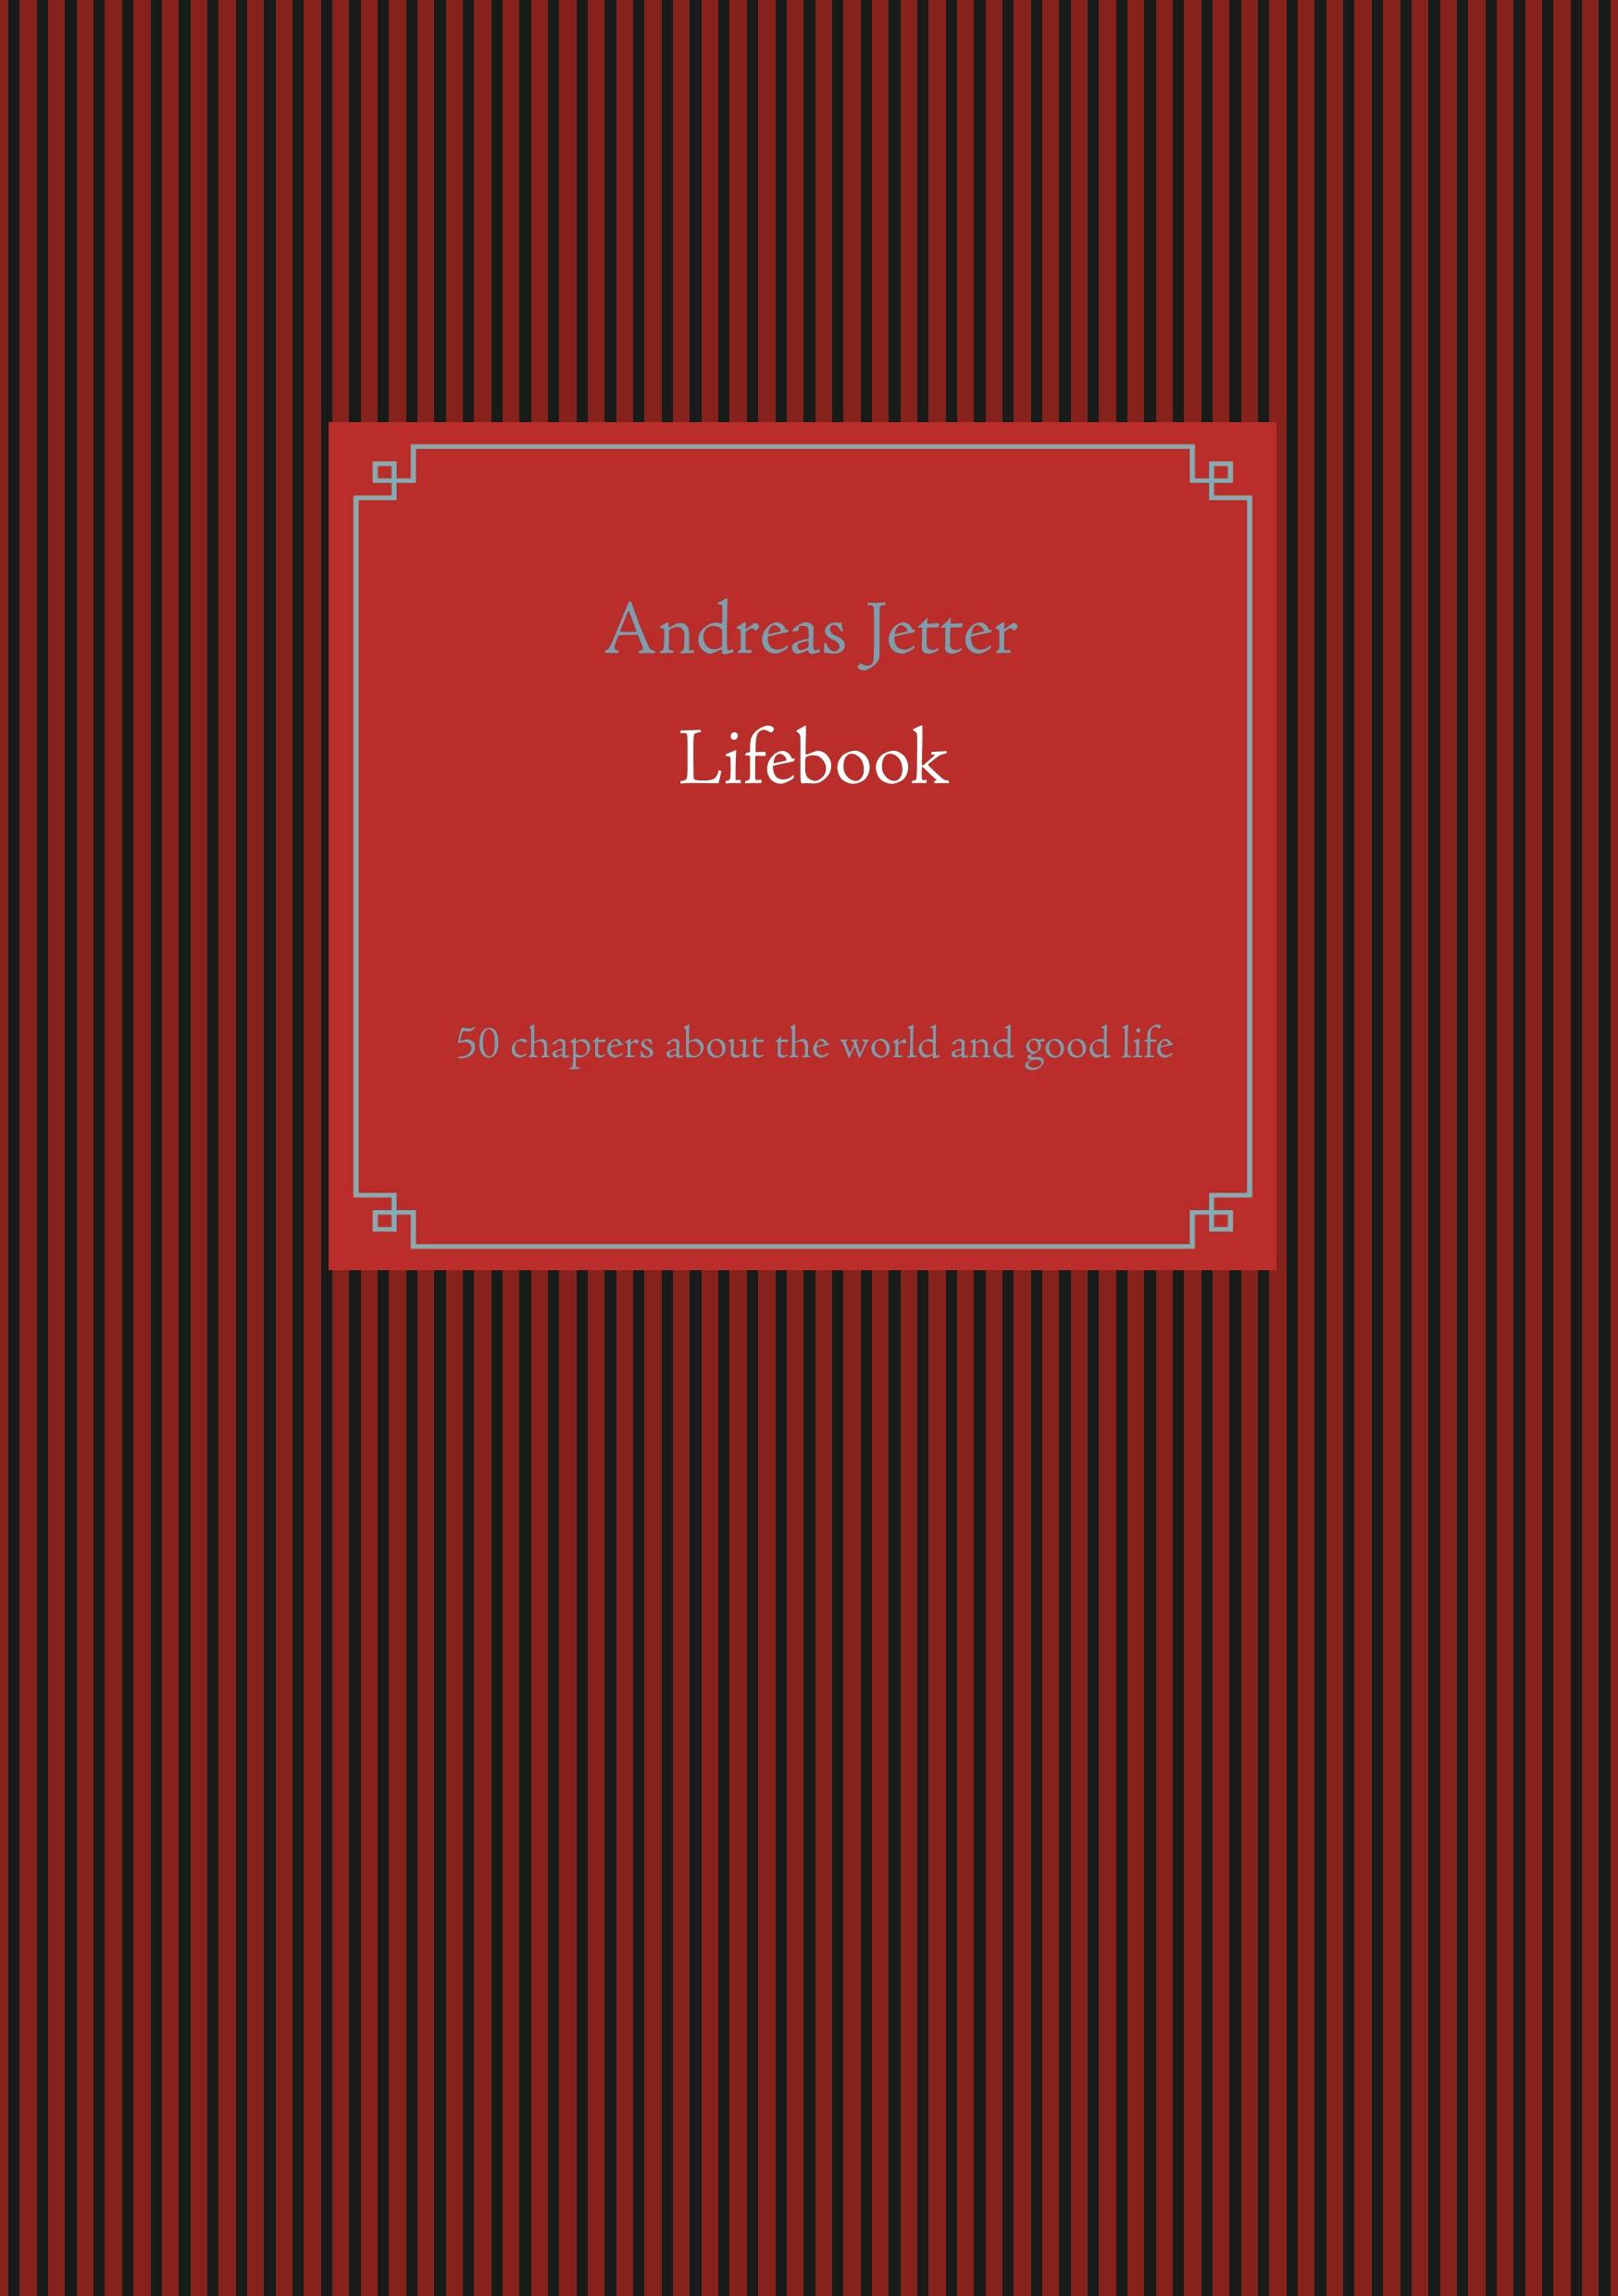 Lifebook - Andreas Jetter